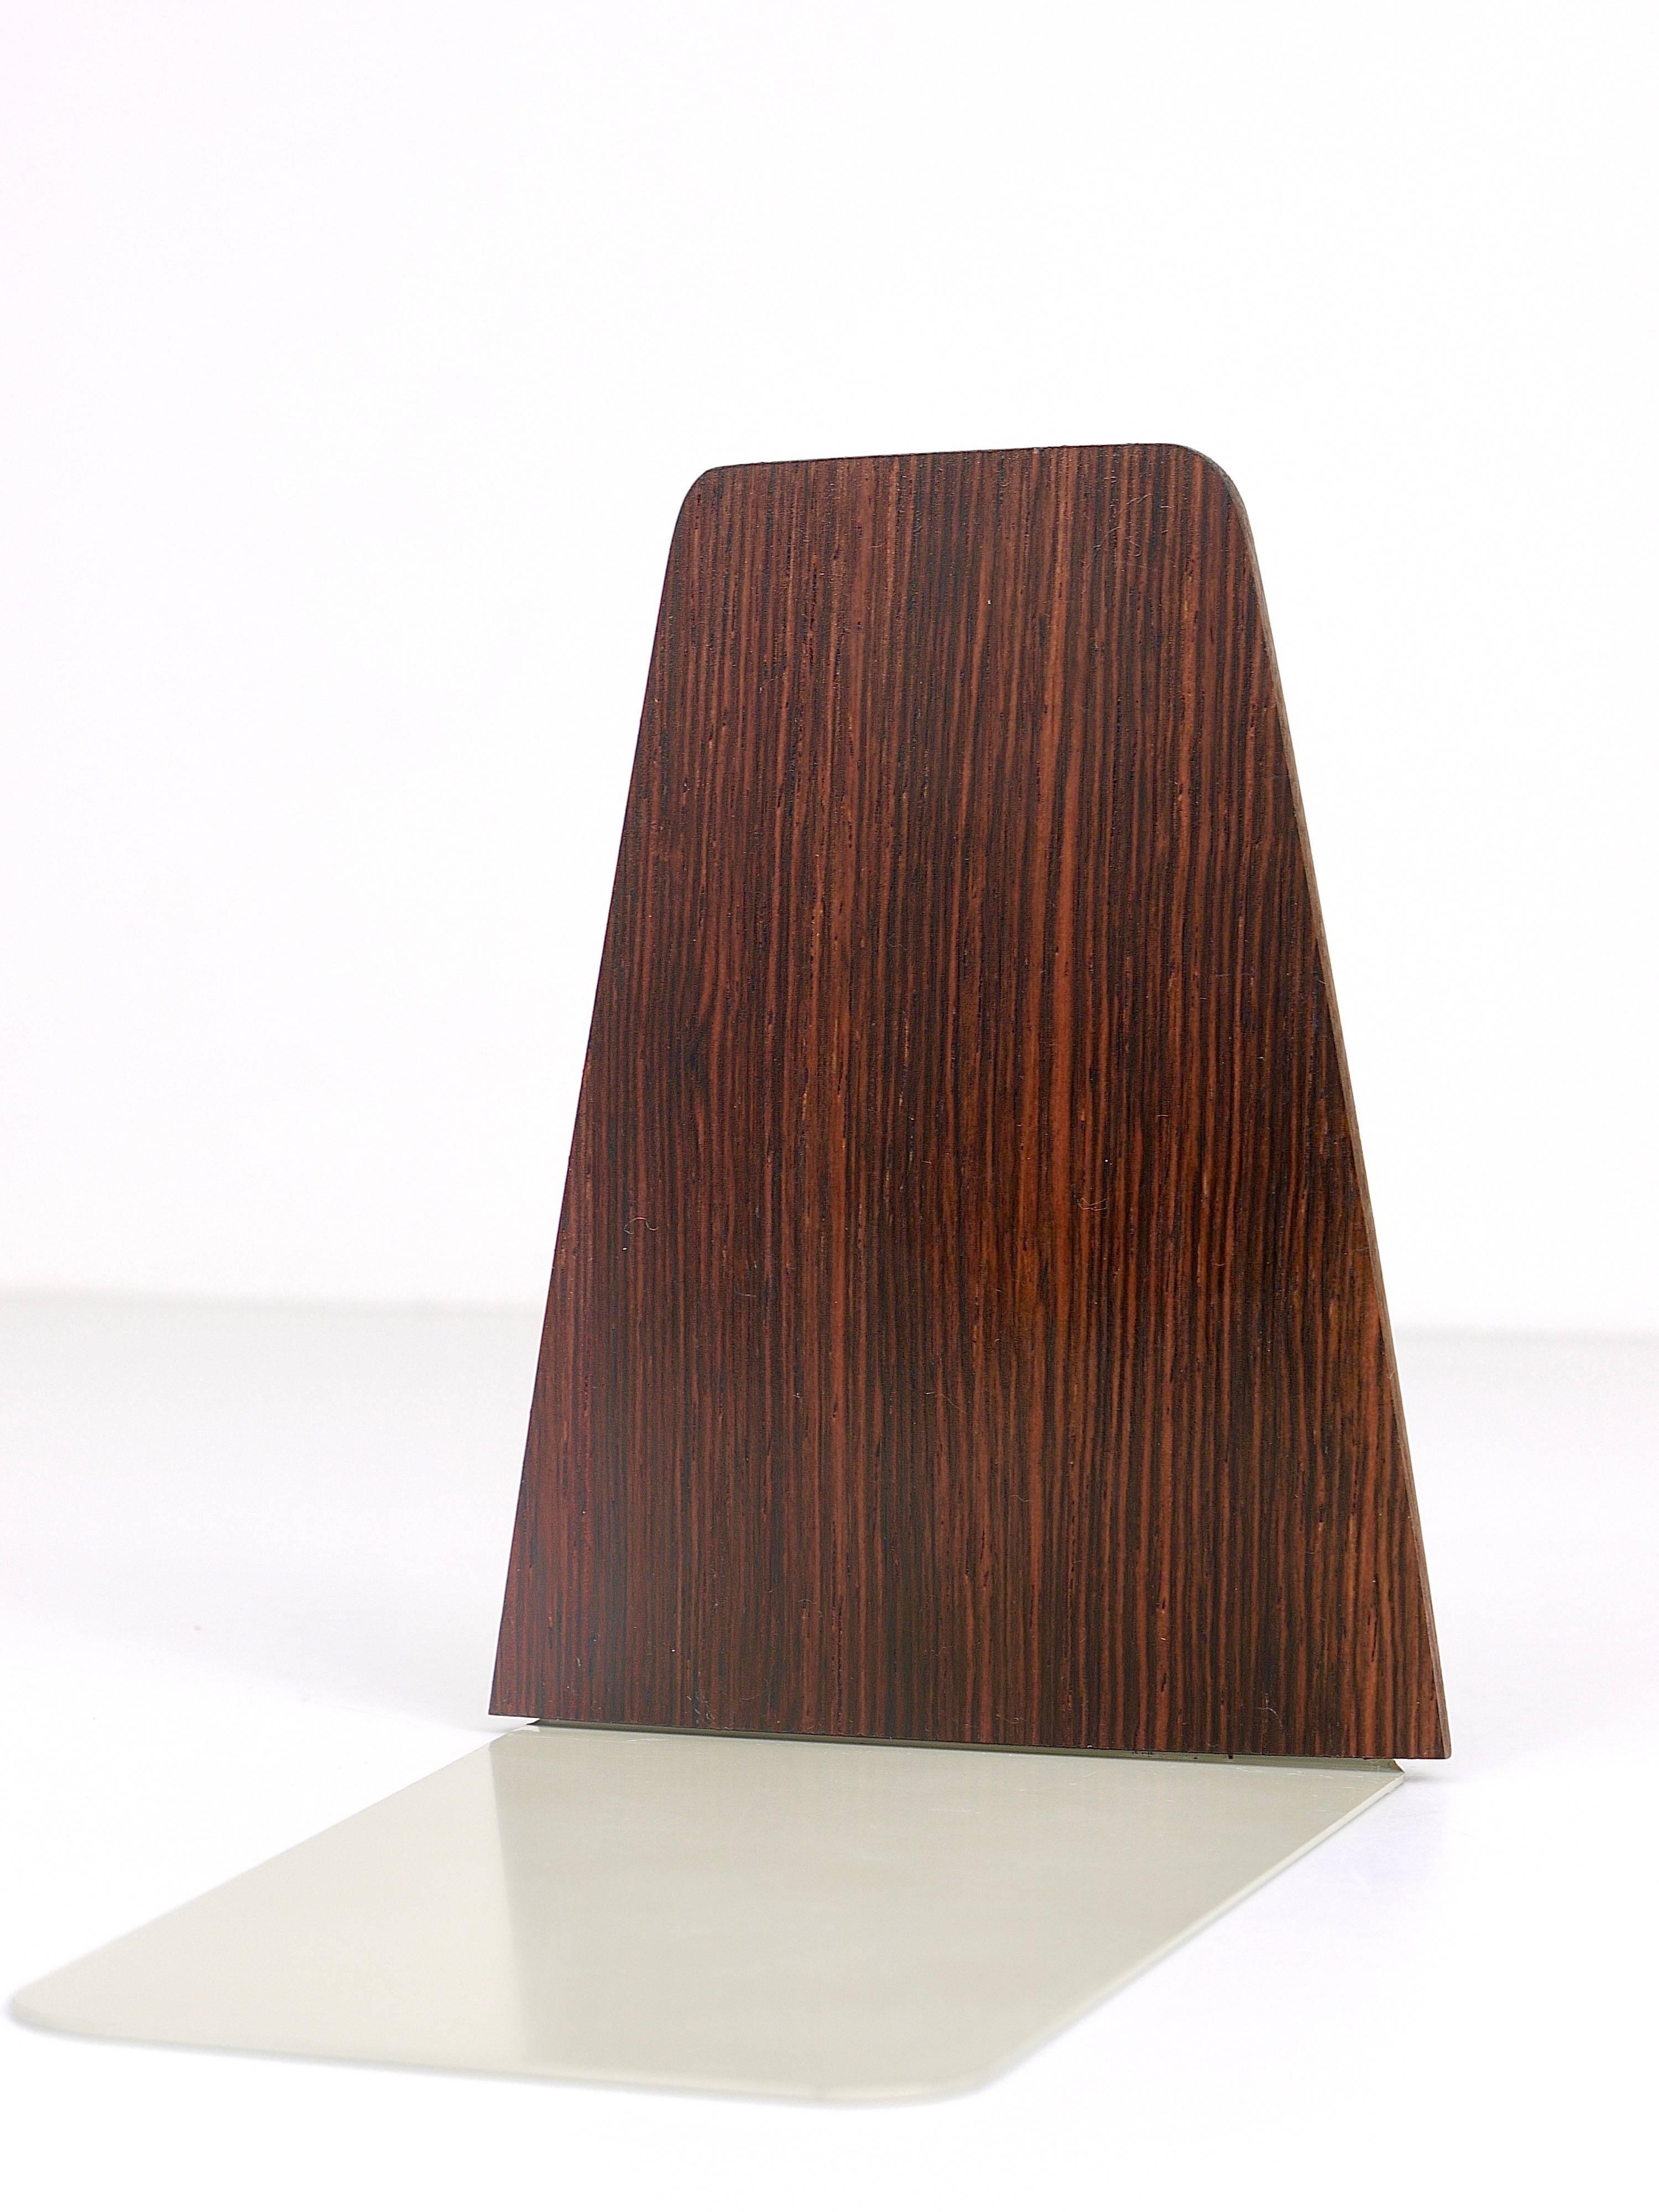 Three Danish Modern Rosewood and Metal Book Ends, Denmark, 1960s 1